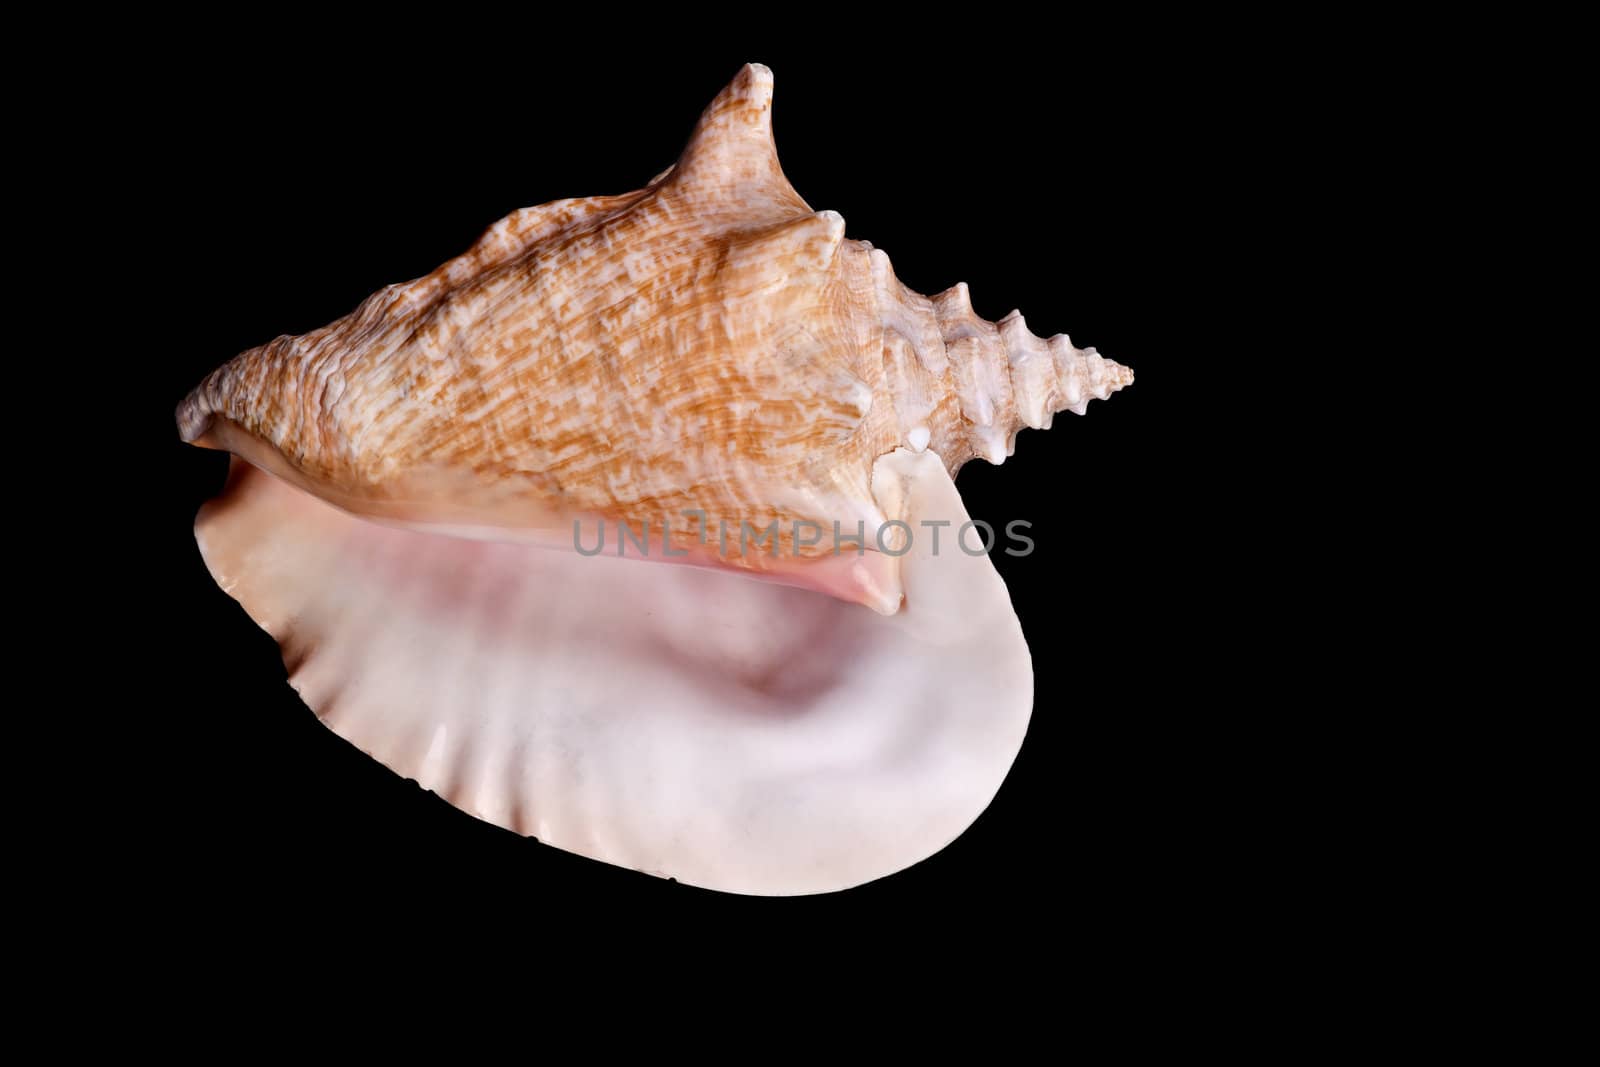 Shell by Marcus